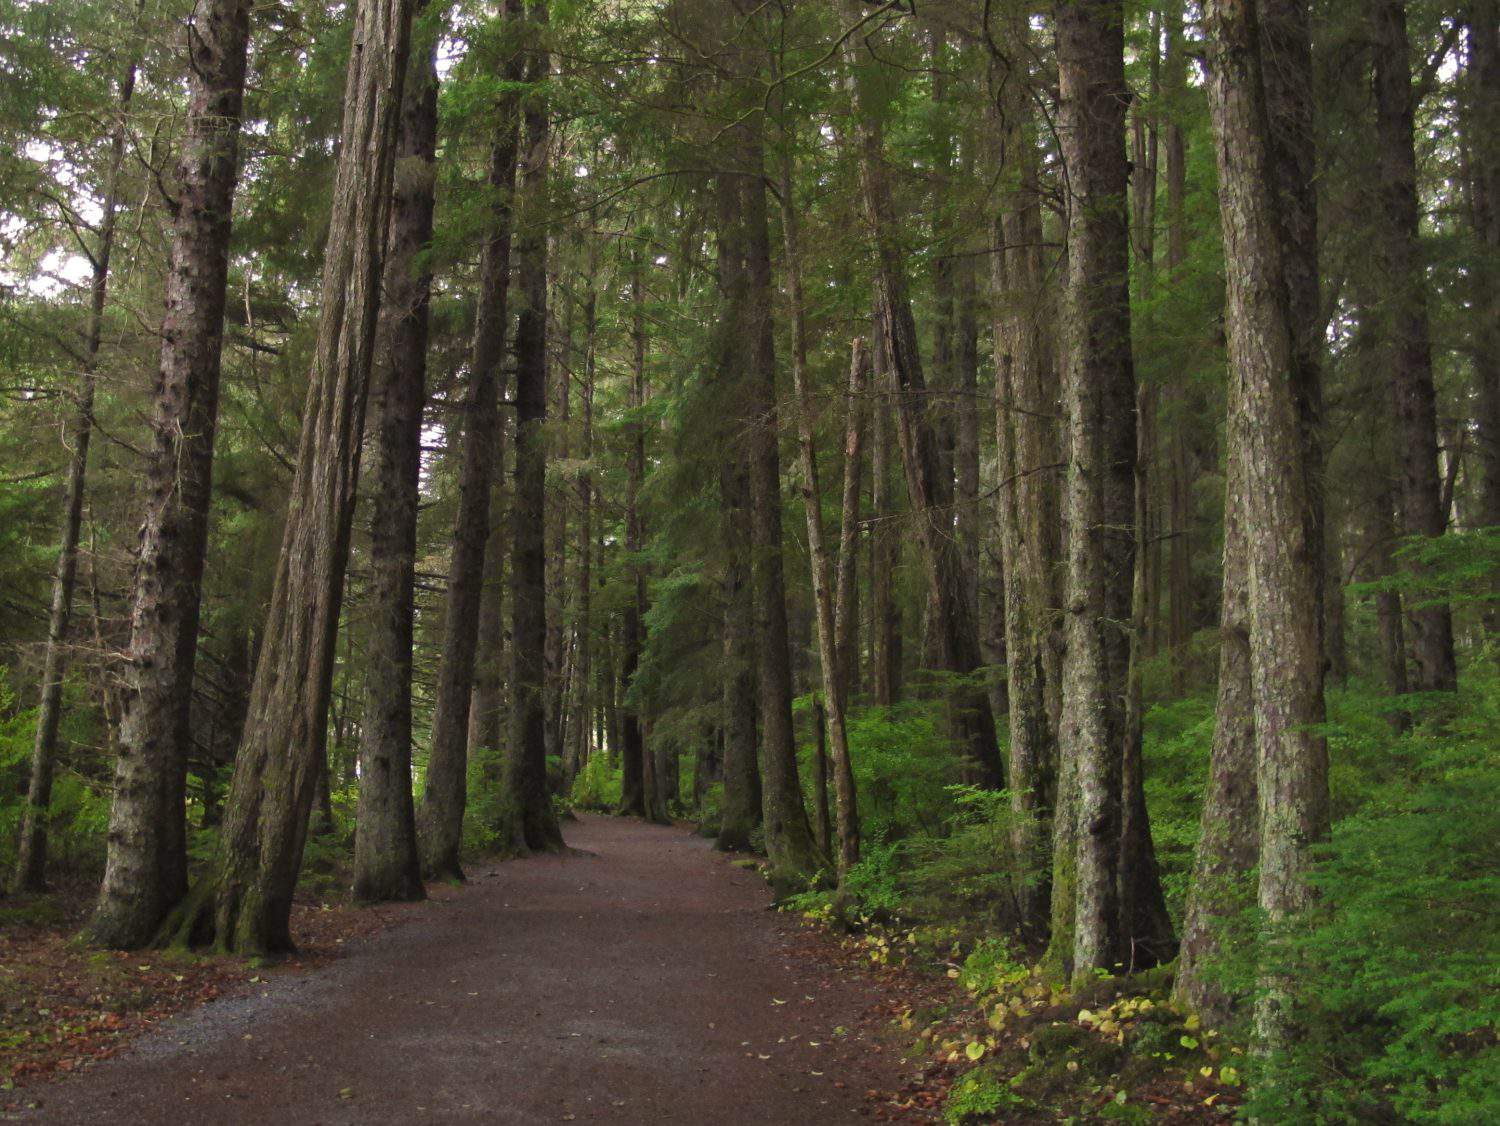 Trail through the forest at Sitka National Historical Park, Sitka, Alaska